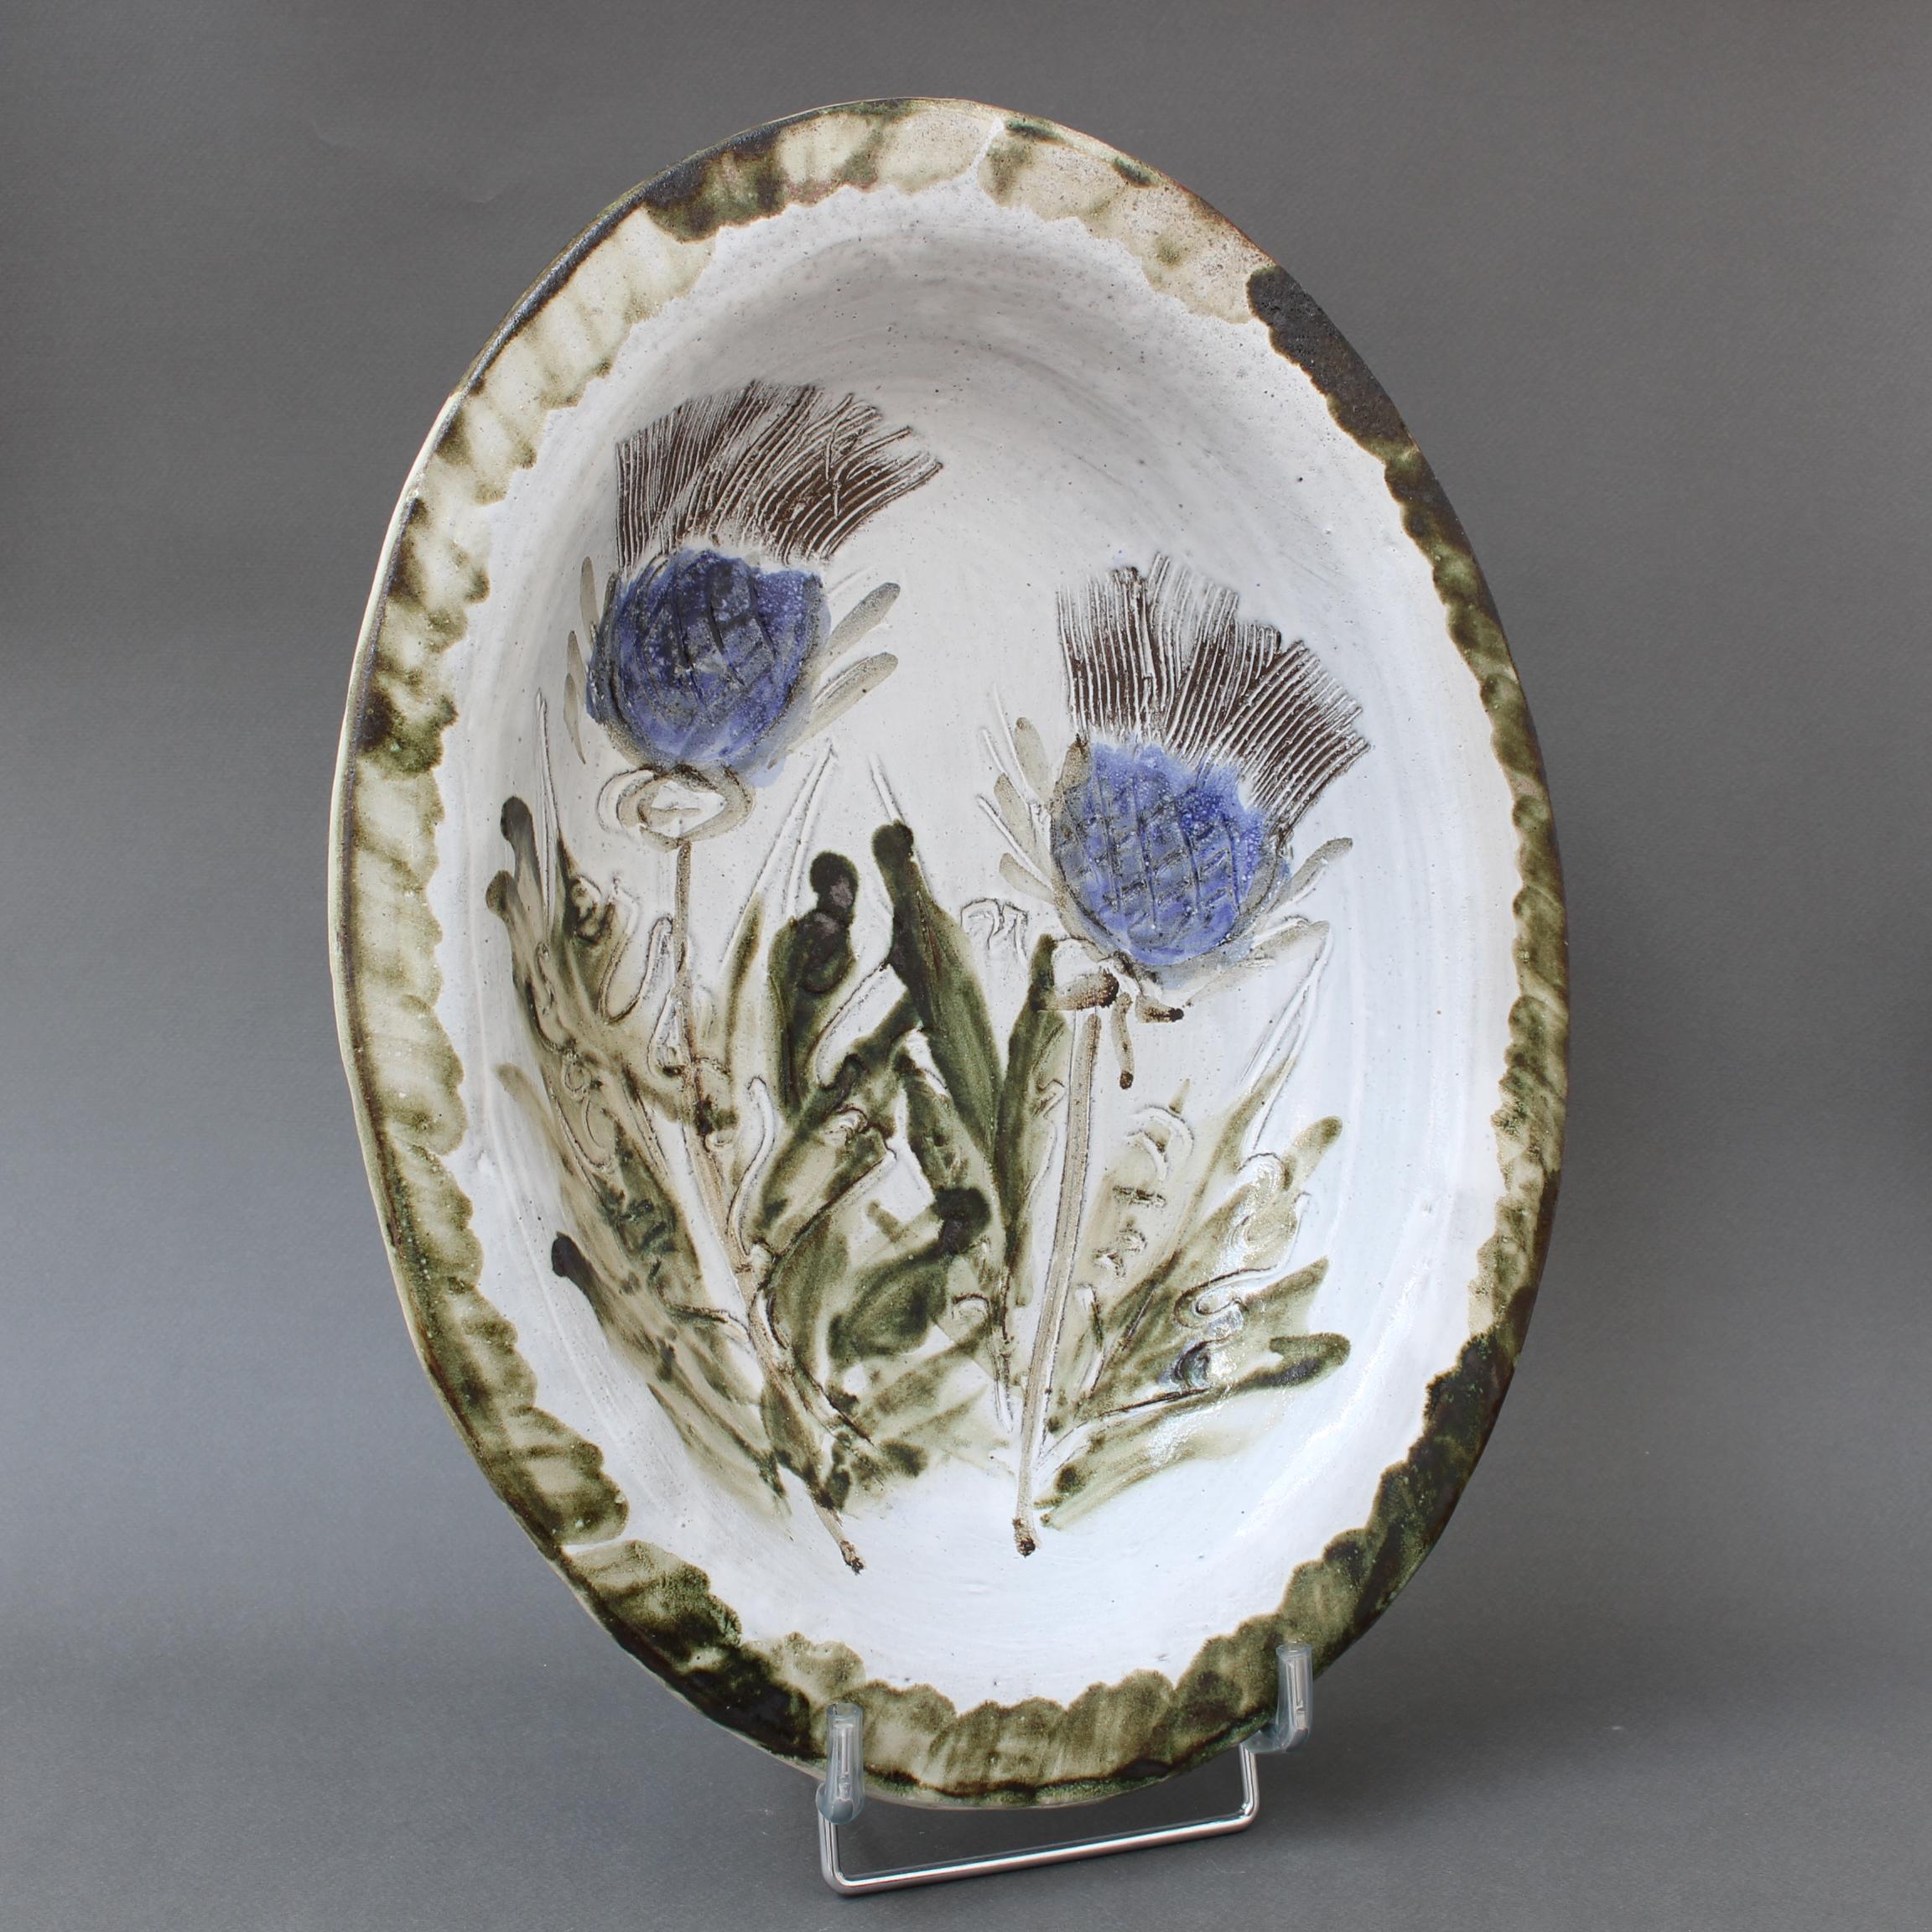 Large mid-century decorative platter (circa 1970s) by Albert Thiry. A creamy-white glaze with touches of blue-grey provides the background for a colourful thistle motif in the centre recess. The rim assumes the colour of the flowers' foliage, some